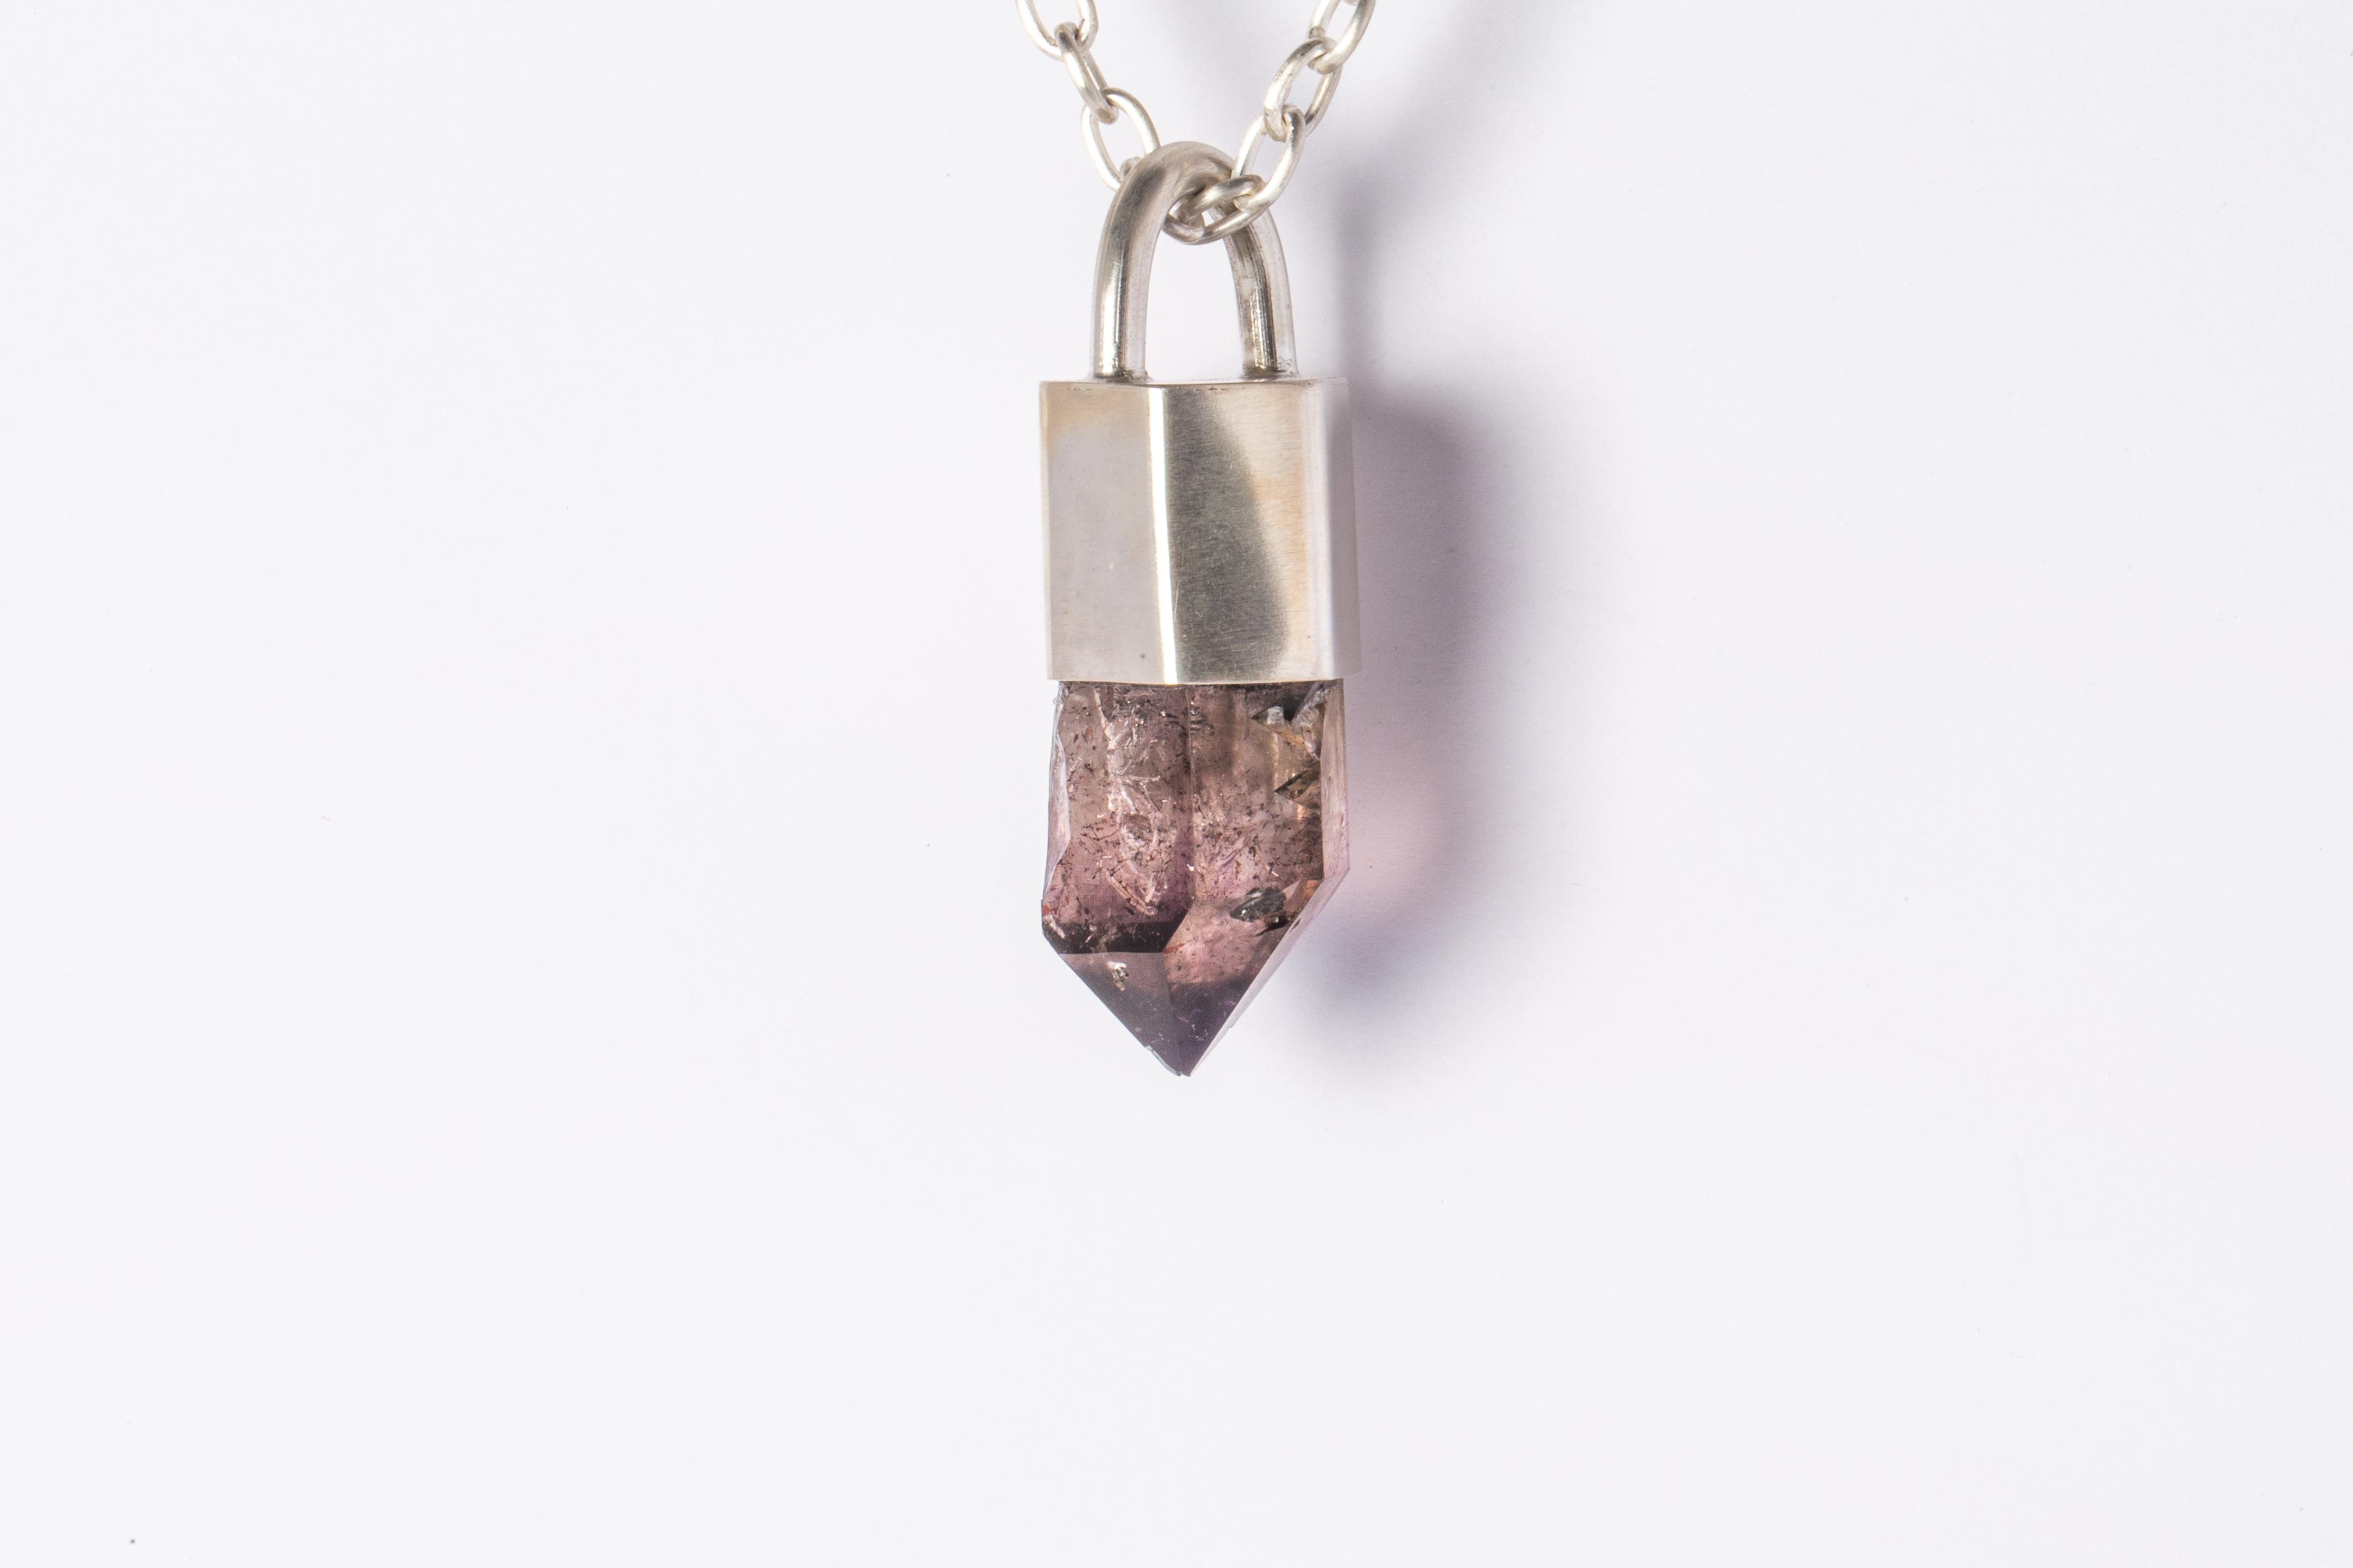 Pendant necklace in matte sterling silver and a slab of rough shangaan amethyst. It comes on a 75 cm sterling silver.
The Talisman series is an exploration into the power of natural crystals. Tools for Magic. The crystals used in these pieces are